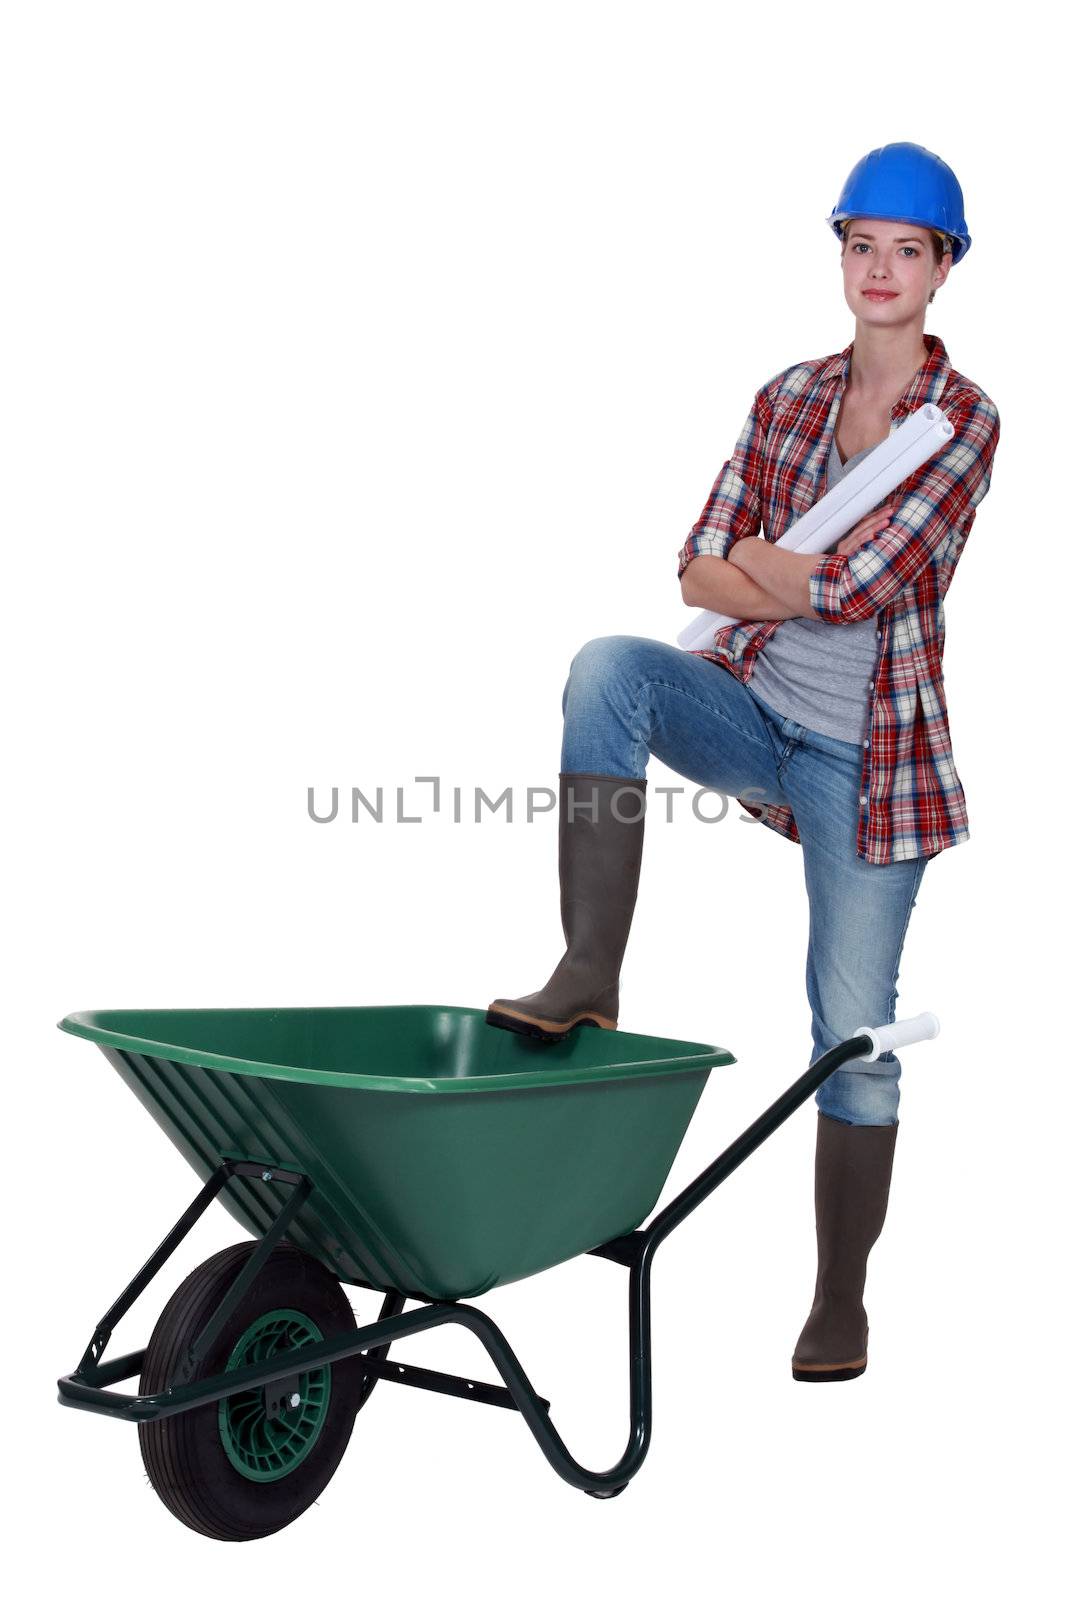 Tradeswoman with her foot propped on a wheelbarrow by phovoir